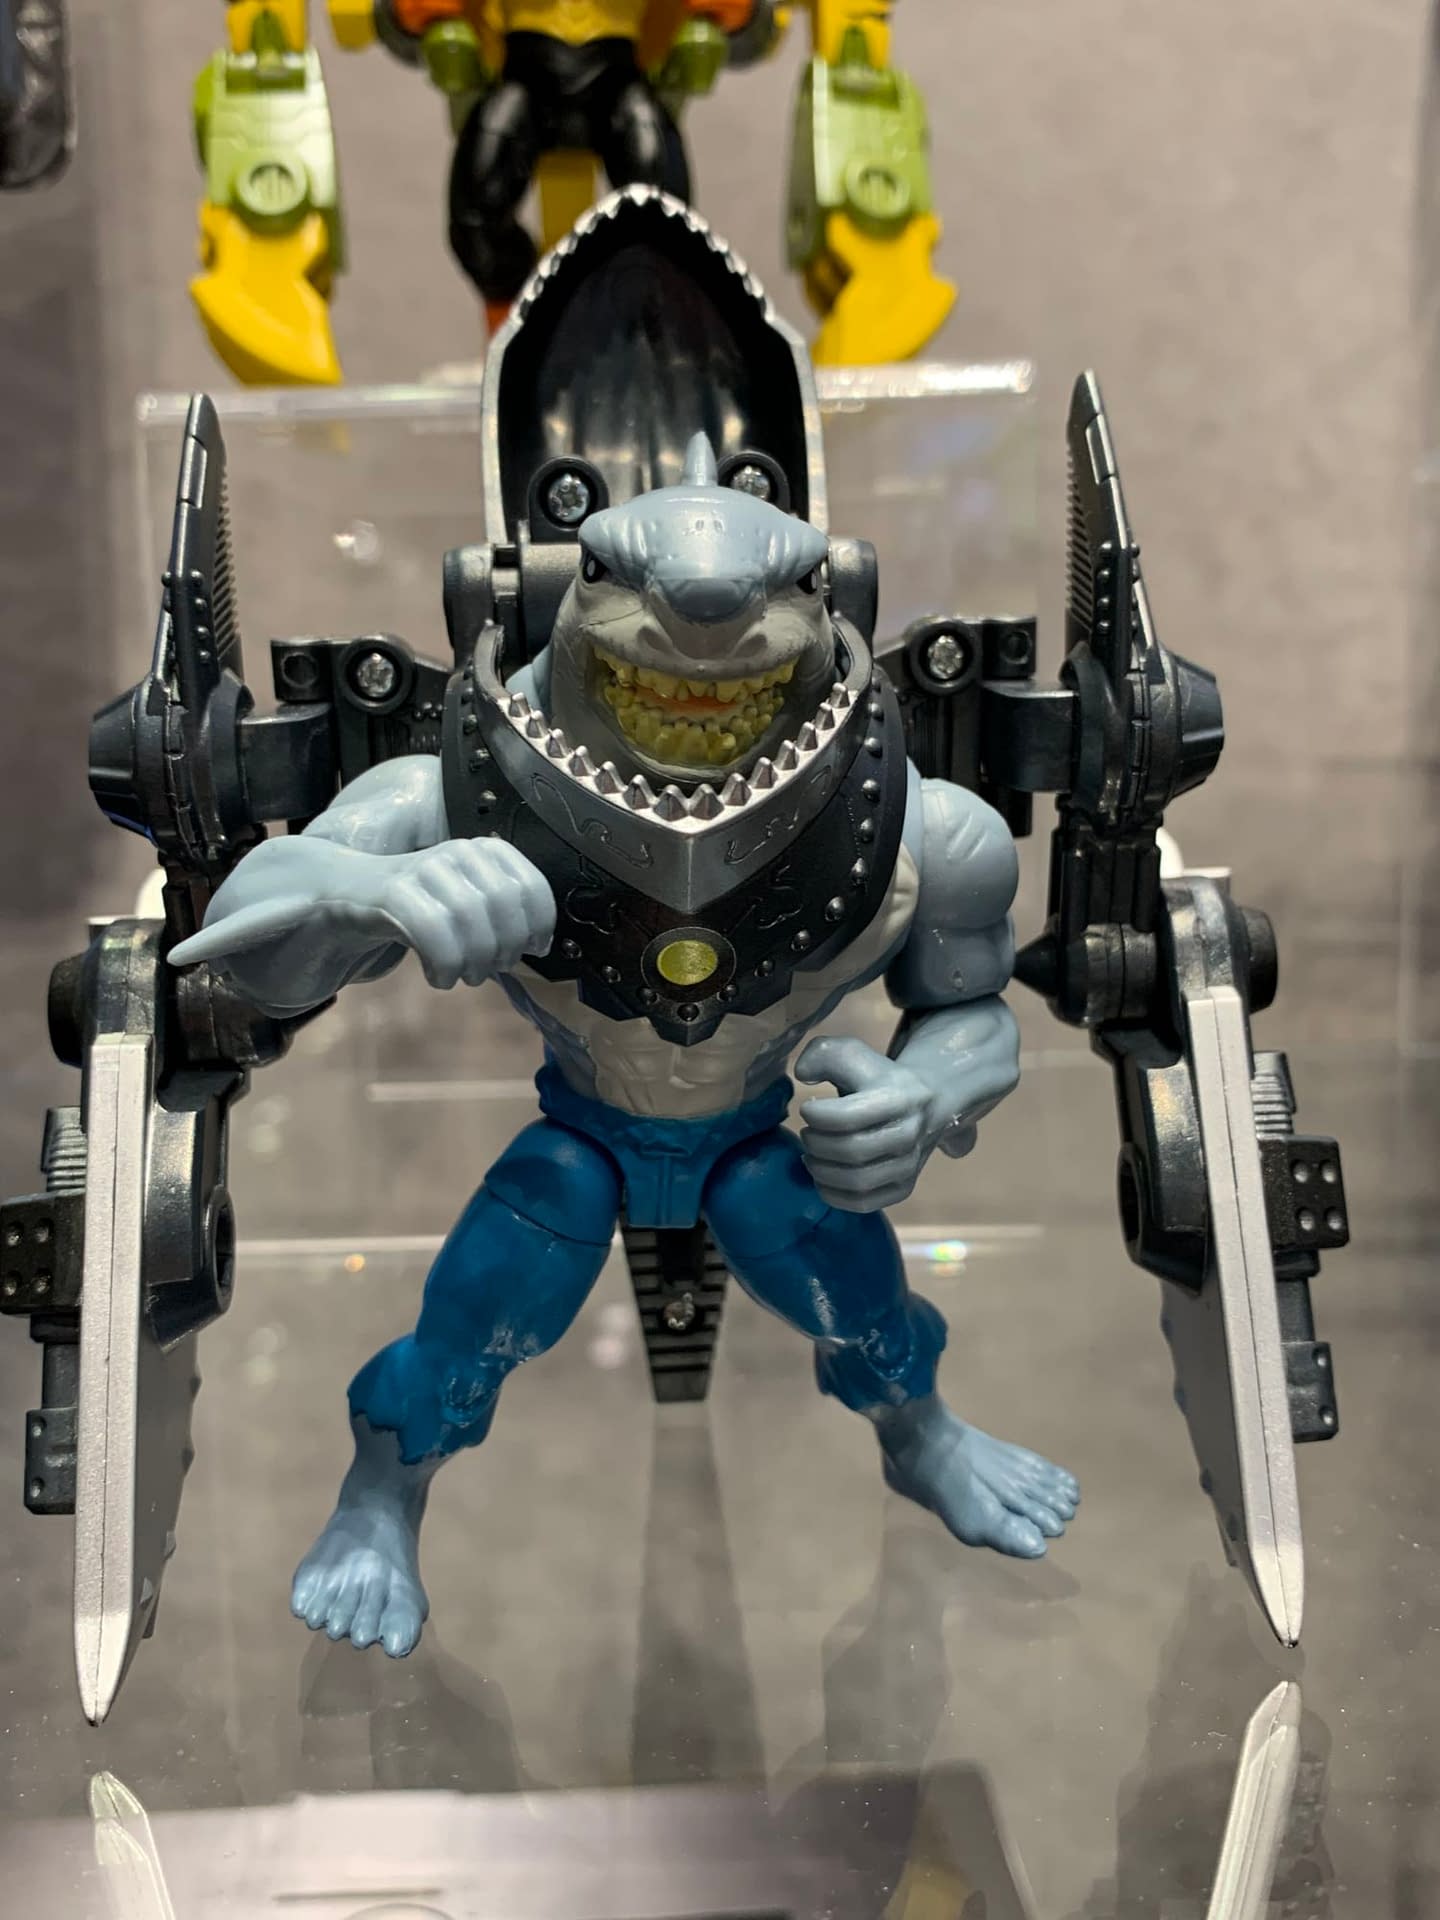 New York Toy Fair: 53 Photos from Spin Master Booth